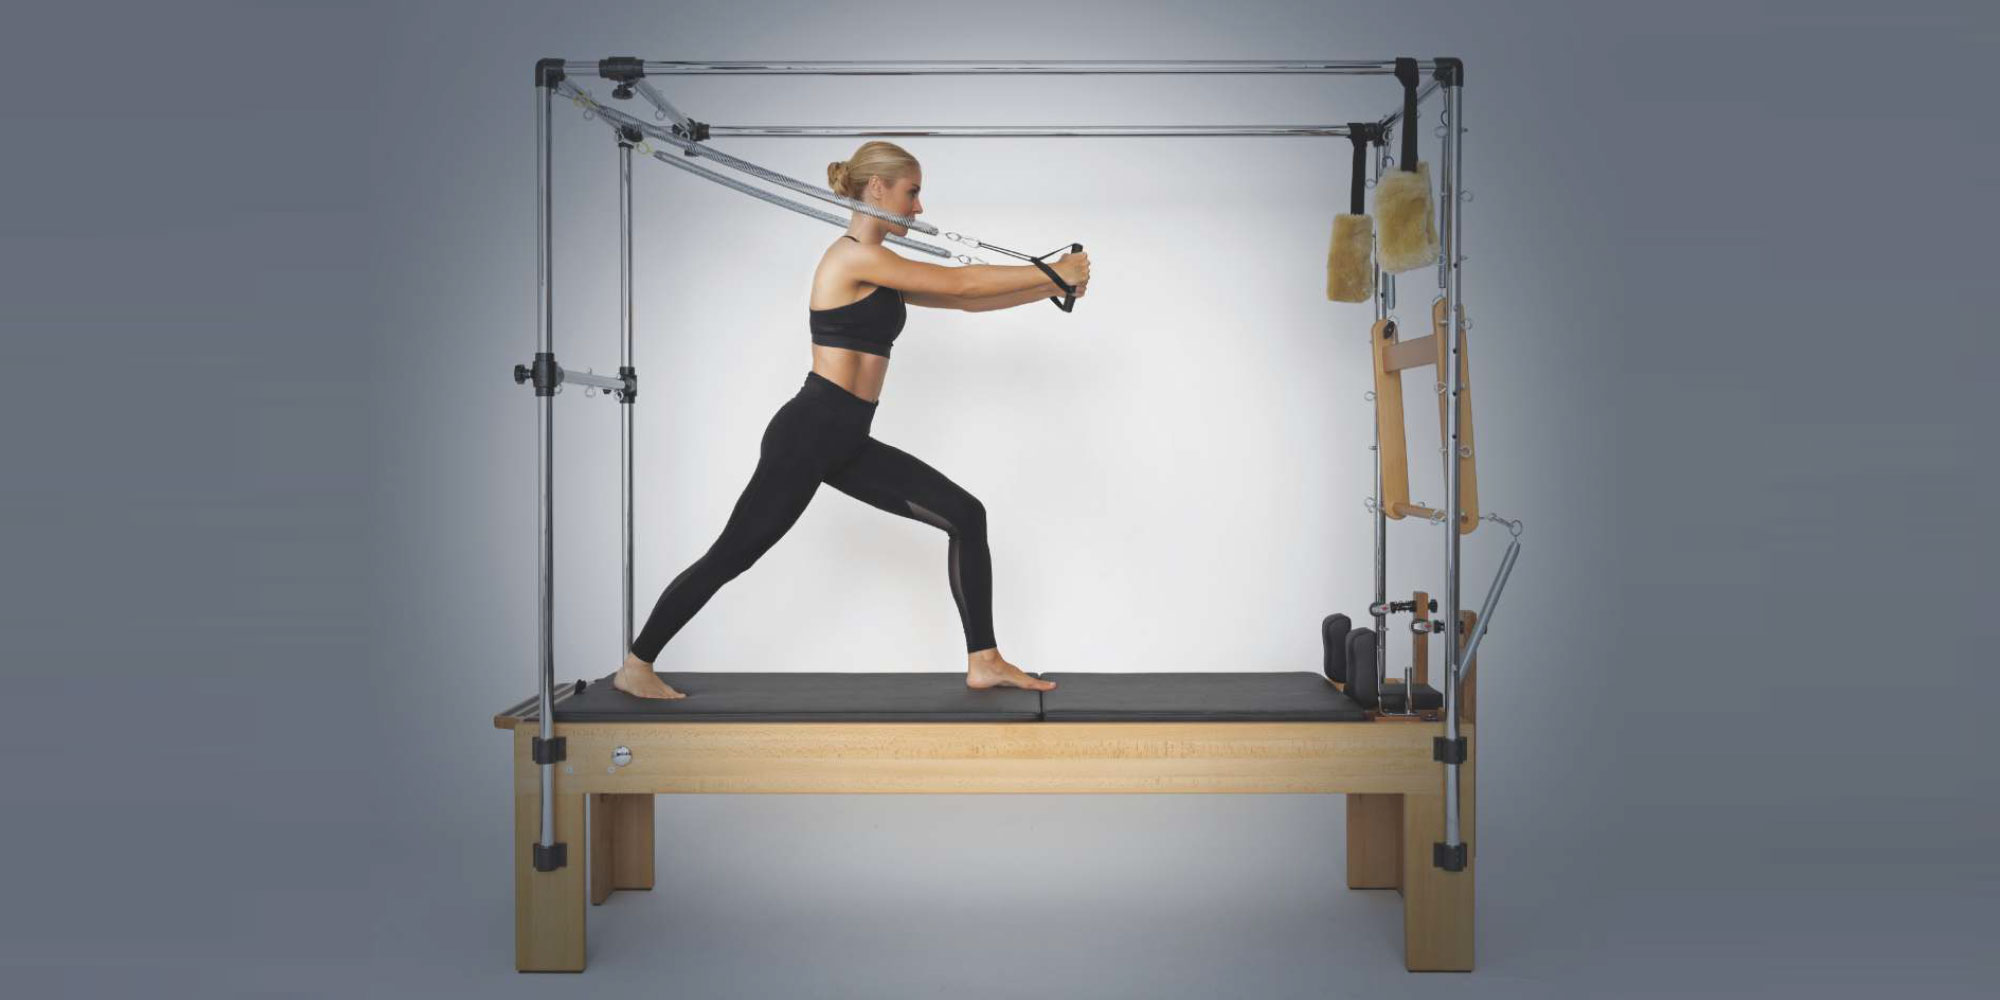 All Around the Roll Down Bar on the Pilates Cadillac Reformer